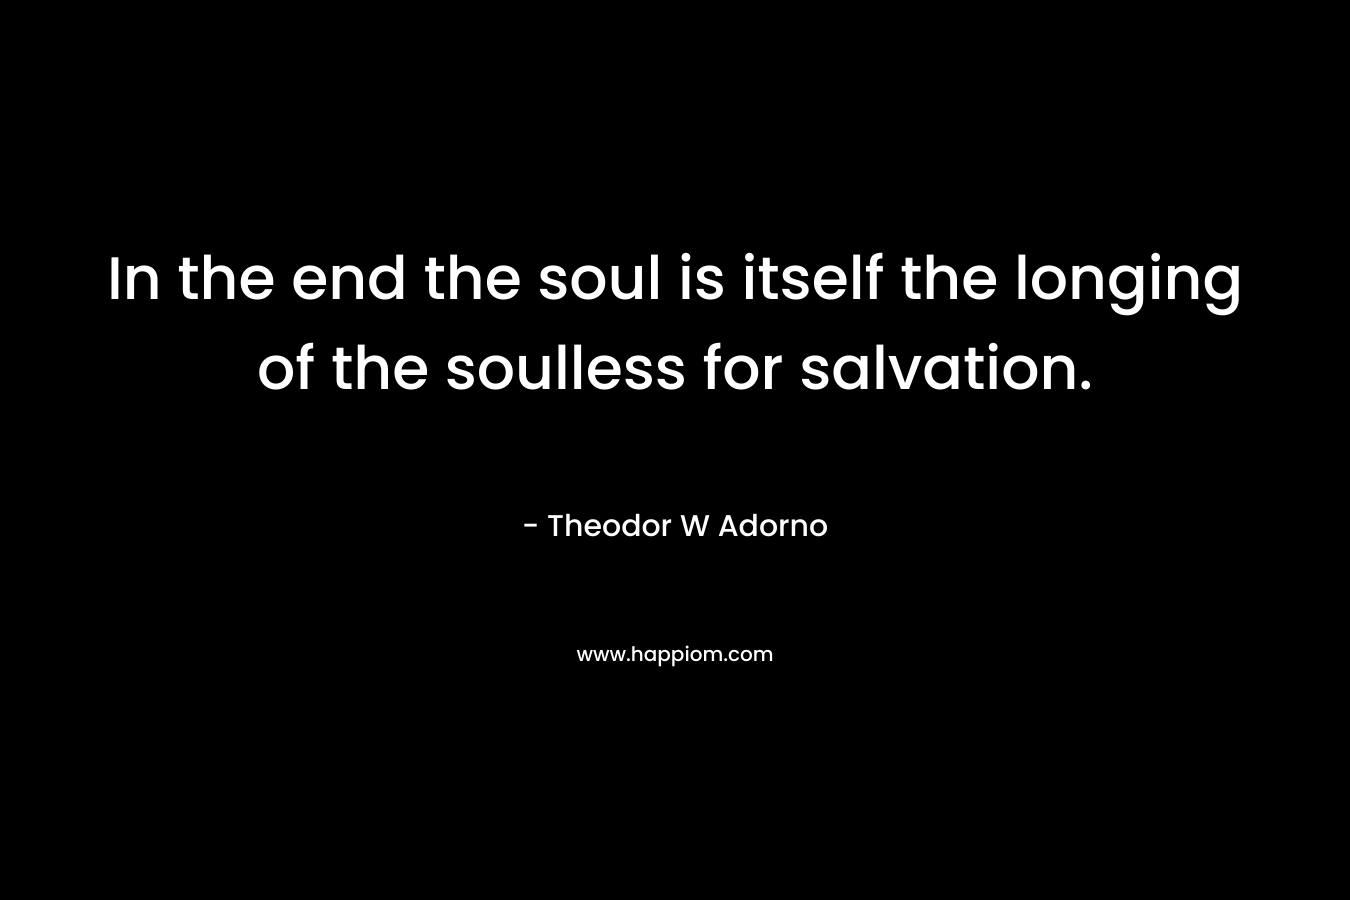 In the end the soul is itself the longing of the soulless for salvation. – Theodor W Adorno